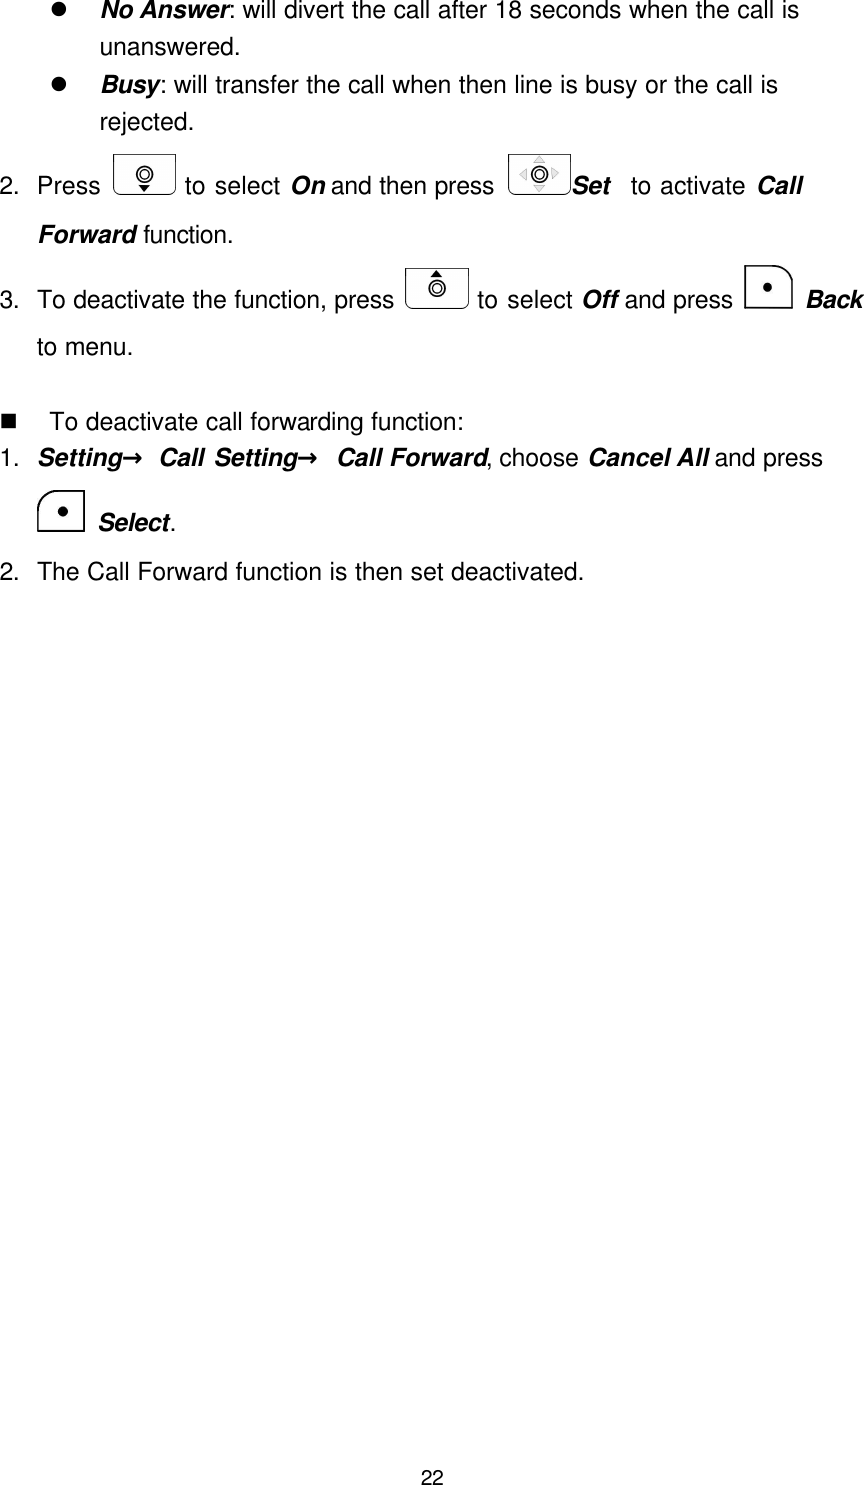  22 l No Answer: will divert the call after 18 seconds when the call is unanswered. l Busy: will transfer the call when then line is busy or the call is rejected. 2. Press   to select On and then press  Set   to activate Call Forward function. 3. To deactivate the function, press   to select Off and press   Back to menu.    n To deactivate call forwarding function: 1. Setting→ Call Setting→ Call Forward, choose Cancel All and press  Select. 2. The Call Forward function is then set deactivated.     